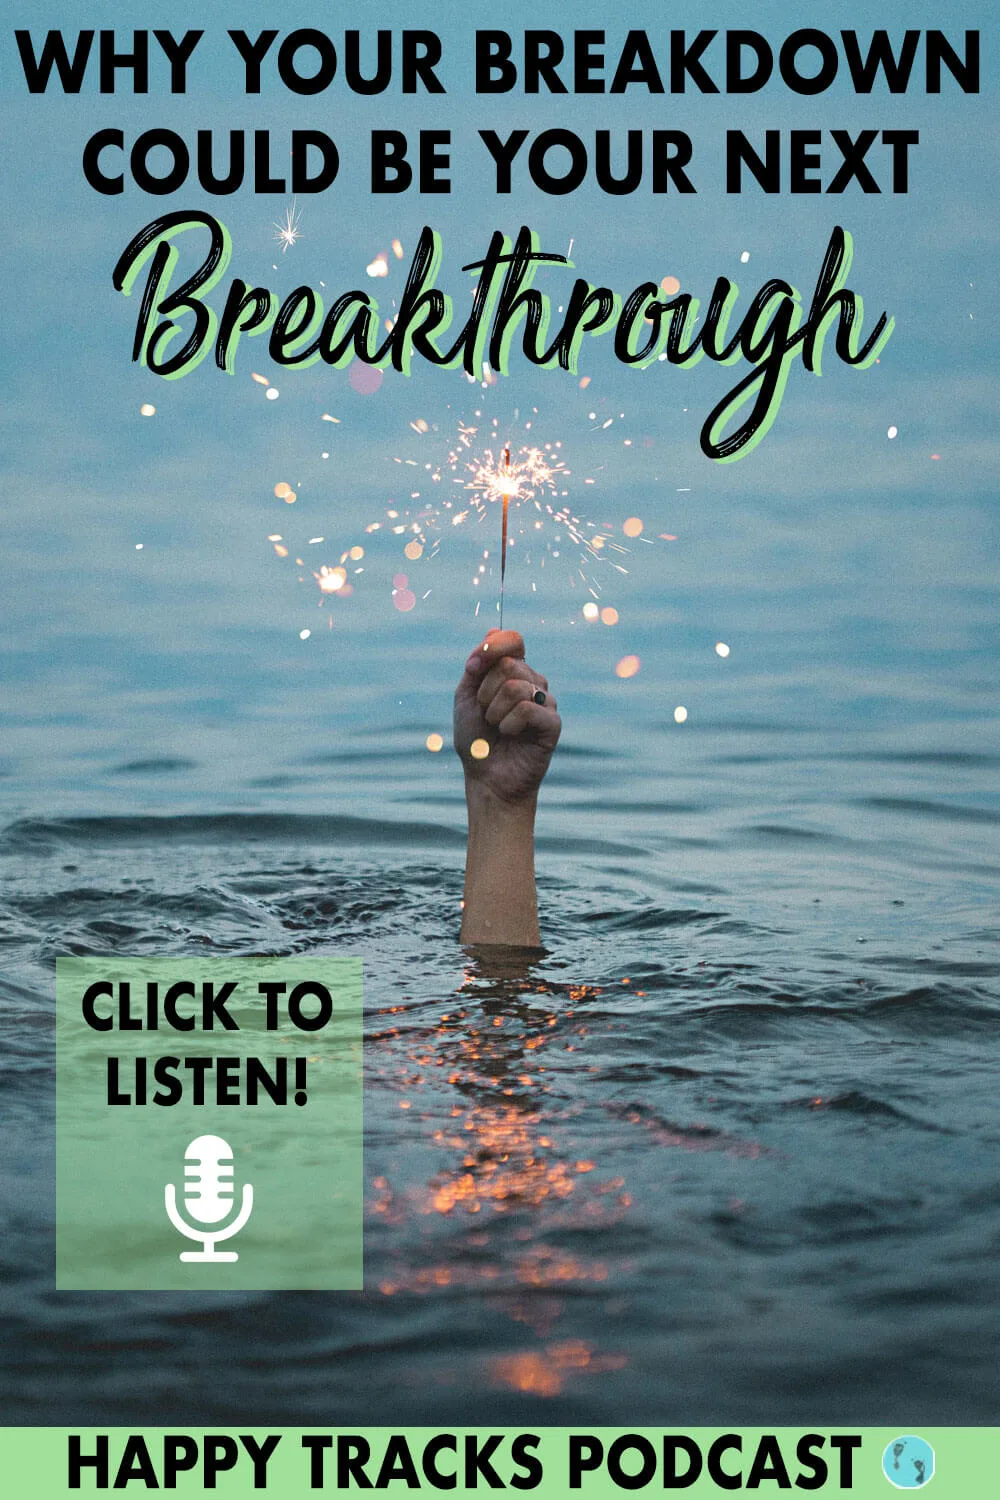 Breakdowns are not bad, they’re just a signal to you that something needs to change. Click to listen to a podcast for women that will help to completely reframe how you look at your breakdowns - for the better.